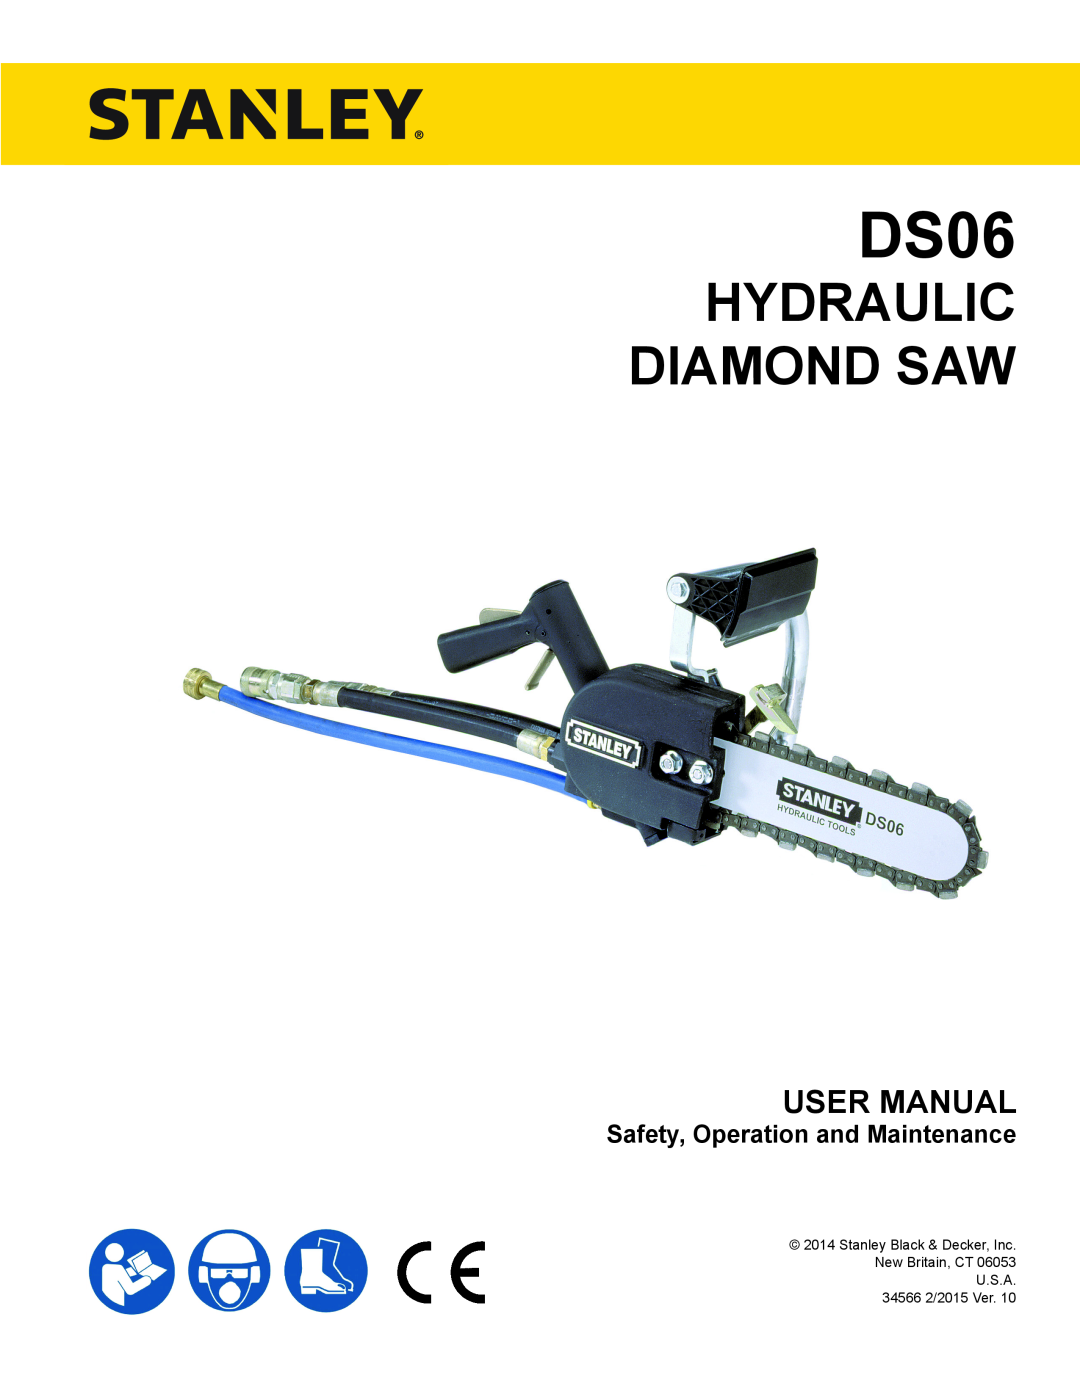 Stanley Black & Decker DS06 user manual User Manual, Safety, Operation and Maintenance, Hydraulic Diamond Saw 